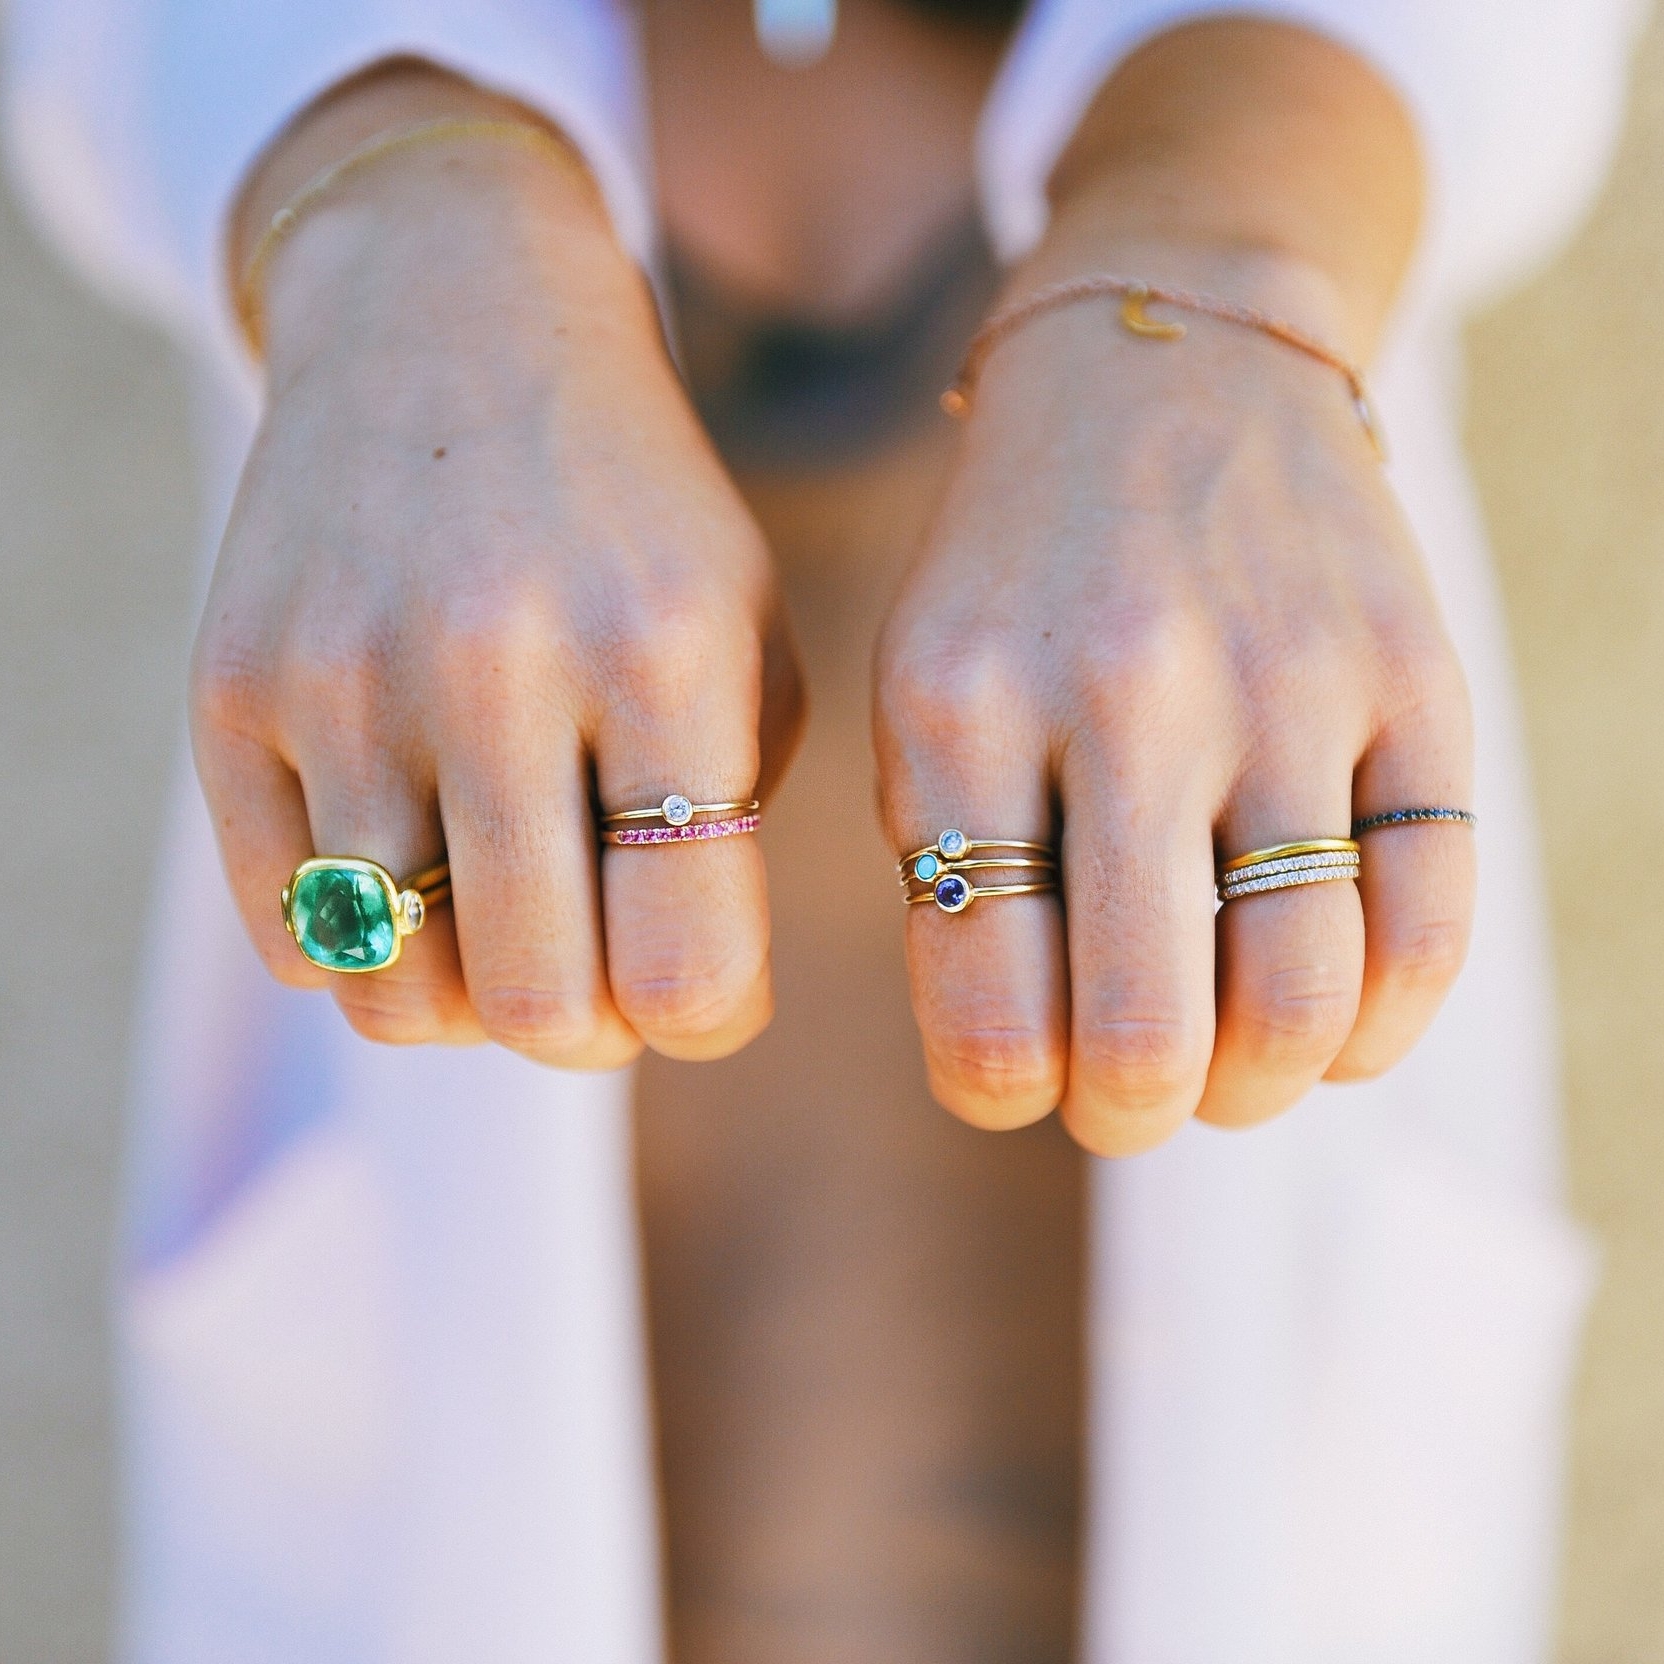 Chelsey's everyday rings